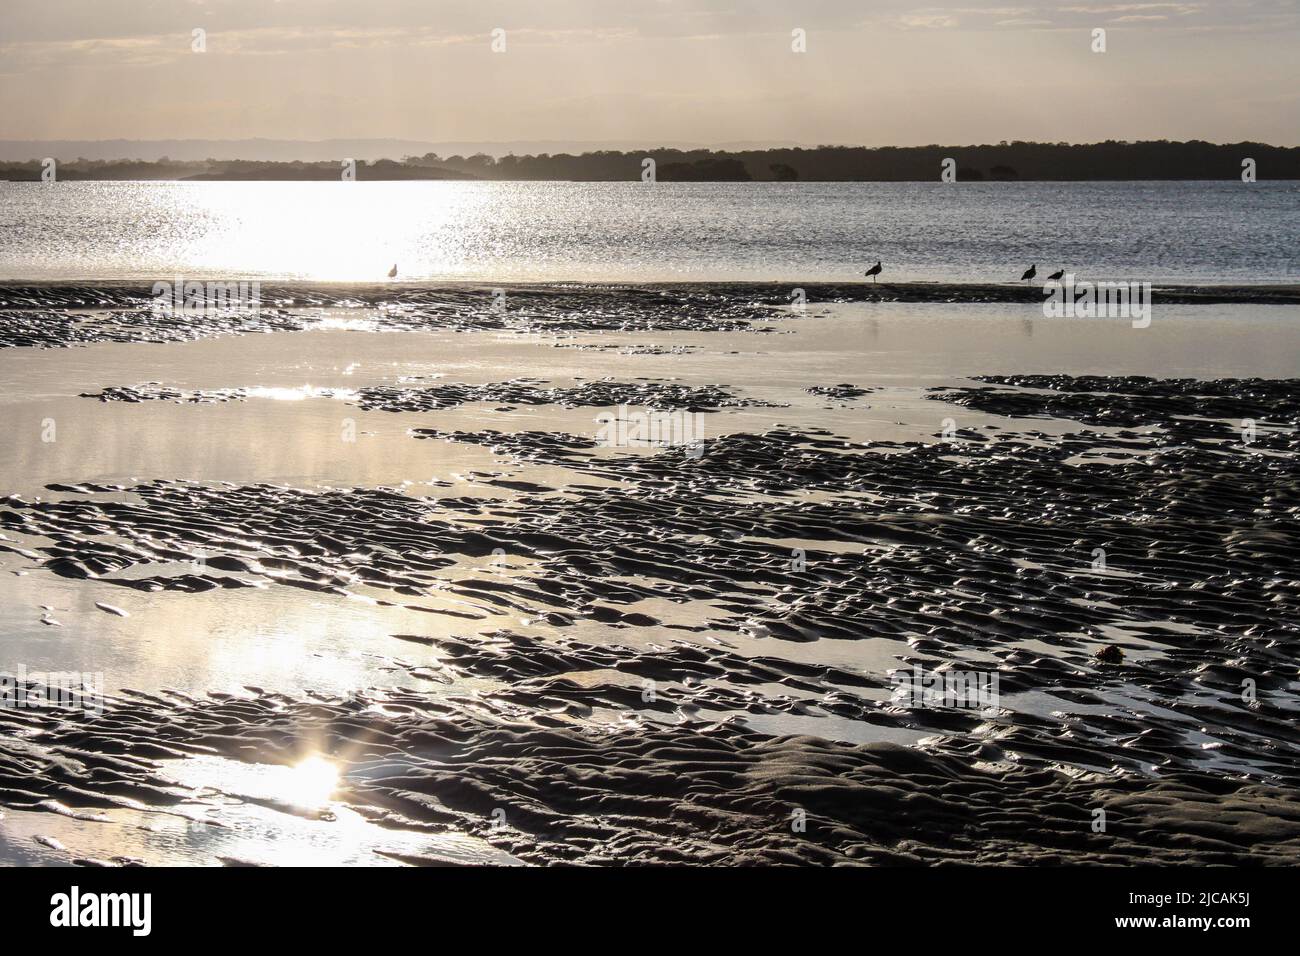 Mudflats at dusk with lens flare and far off coast at other side of bay with water birds wading through the shallows. Stock Photo